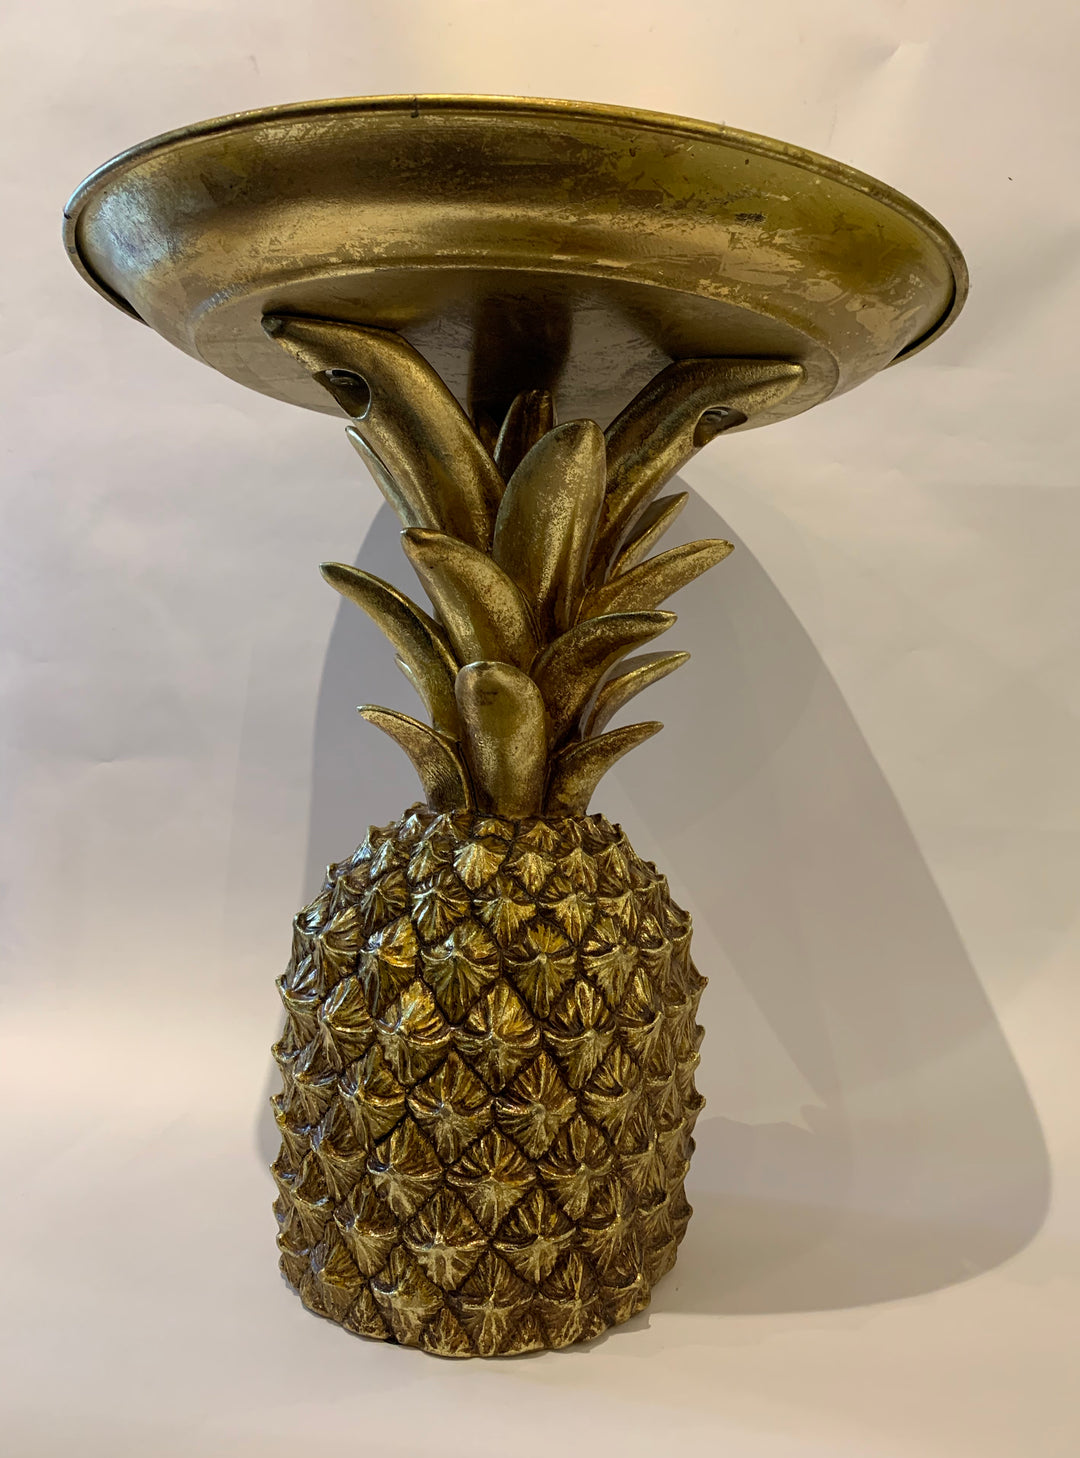 Gold Pineapple Tray Stand, Decorative Gold Pineapple Storage Dish